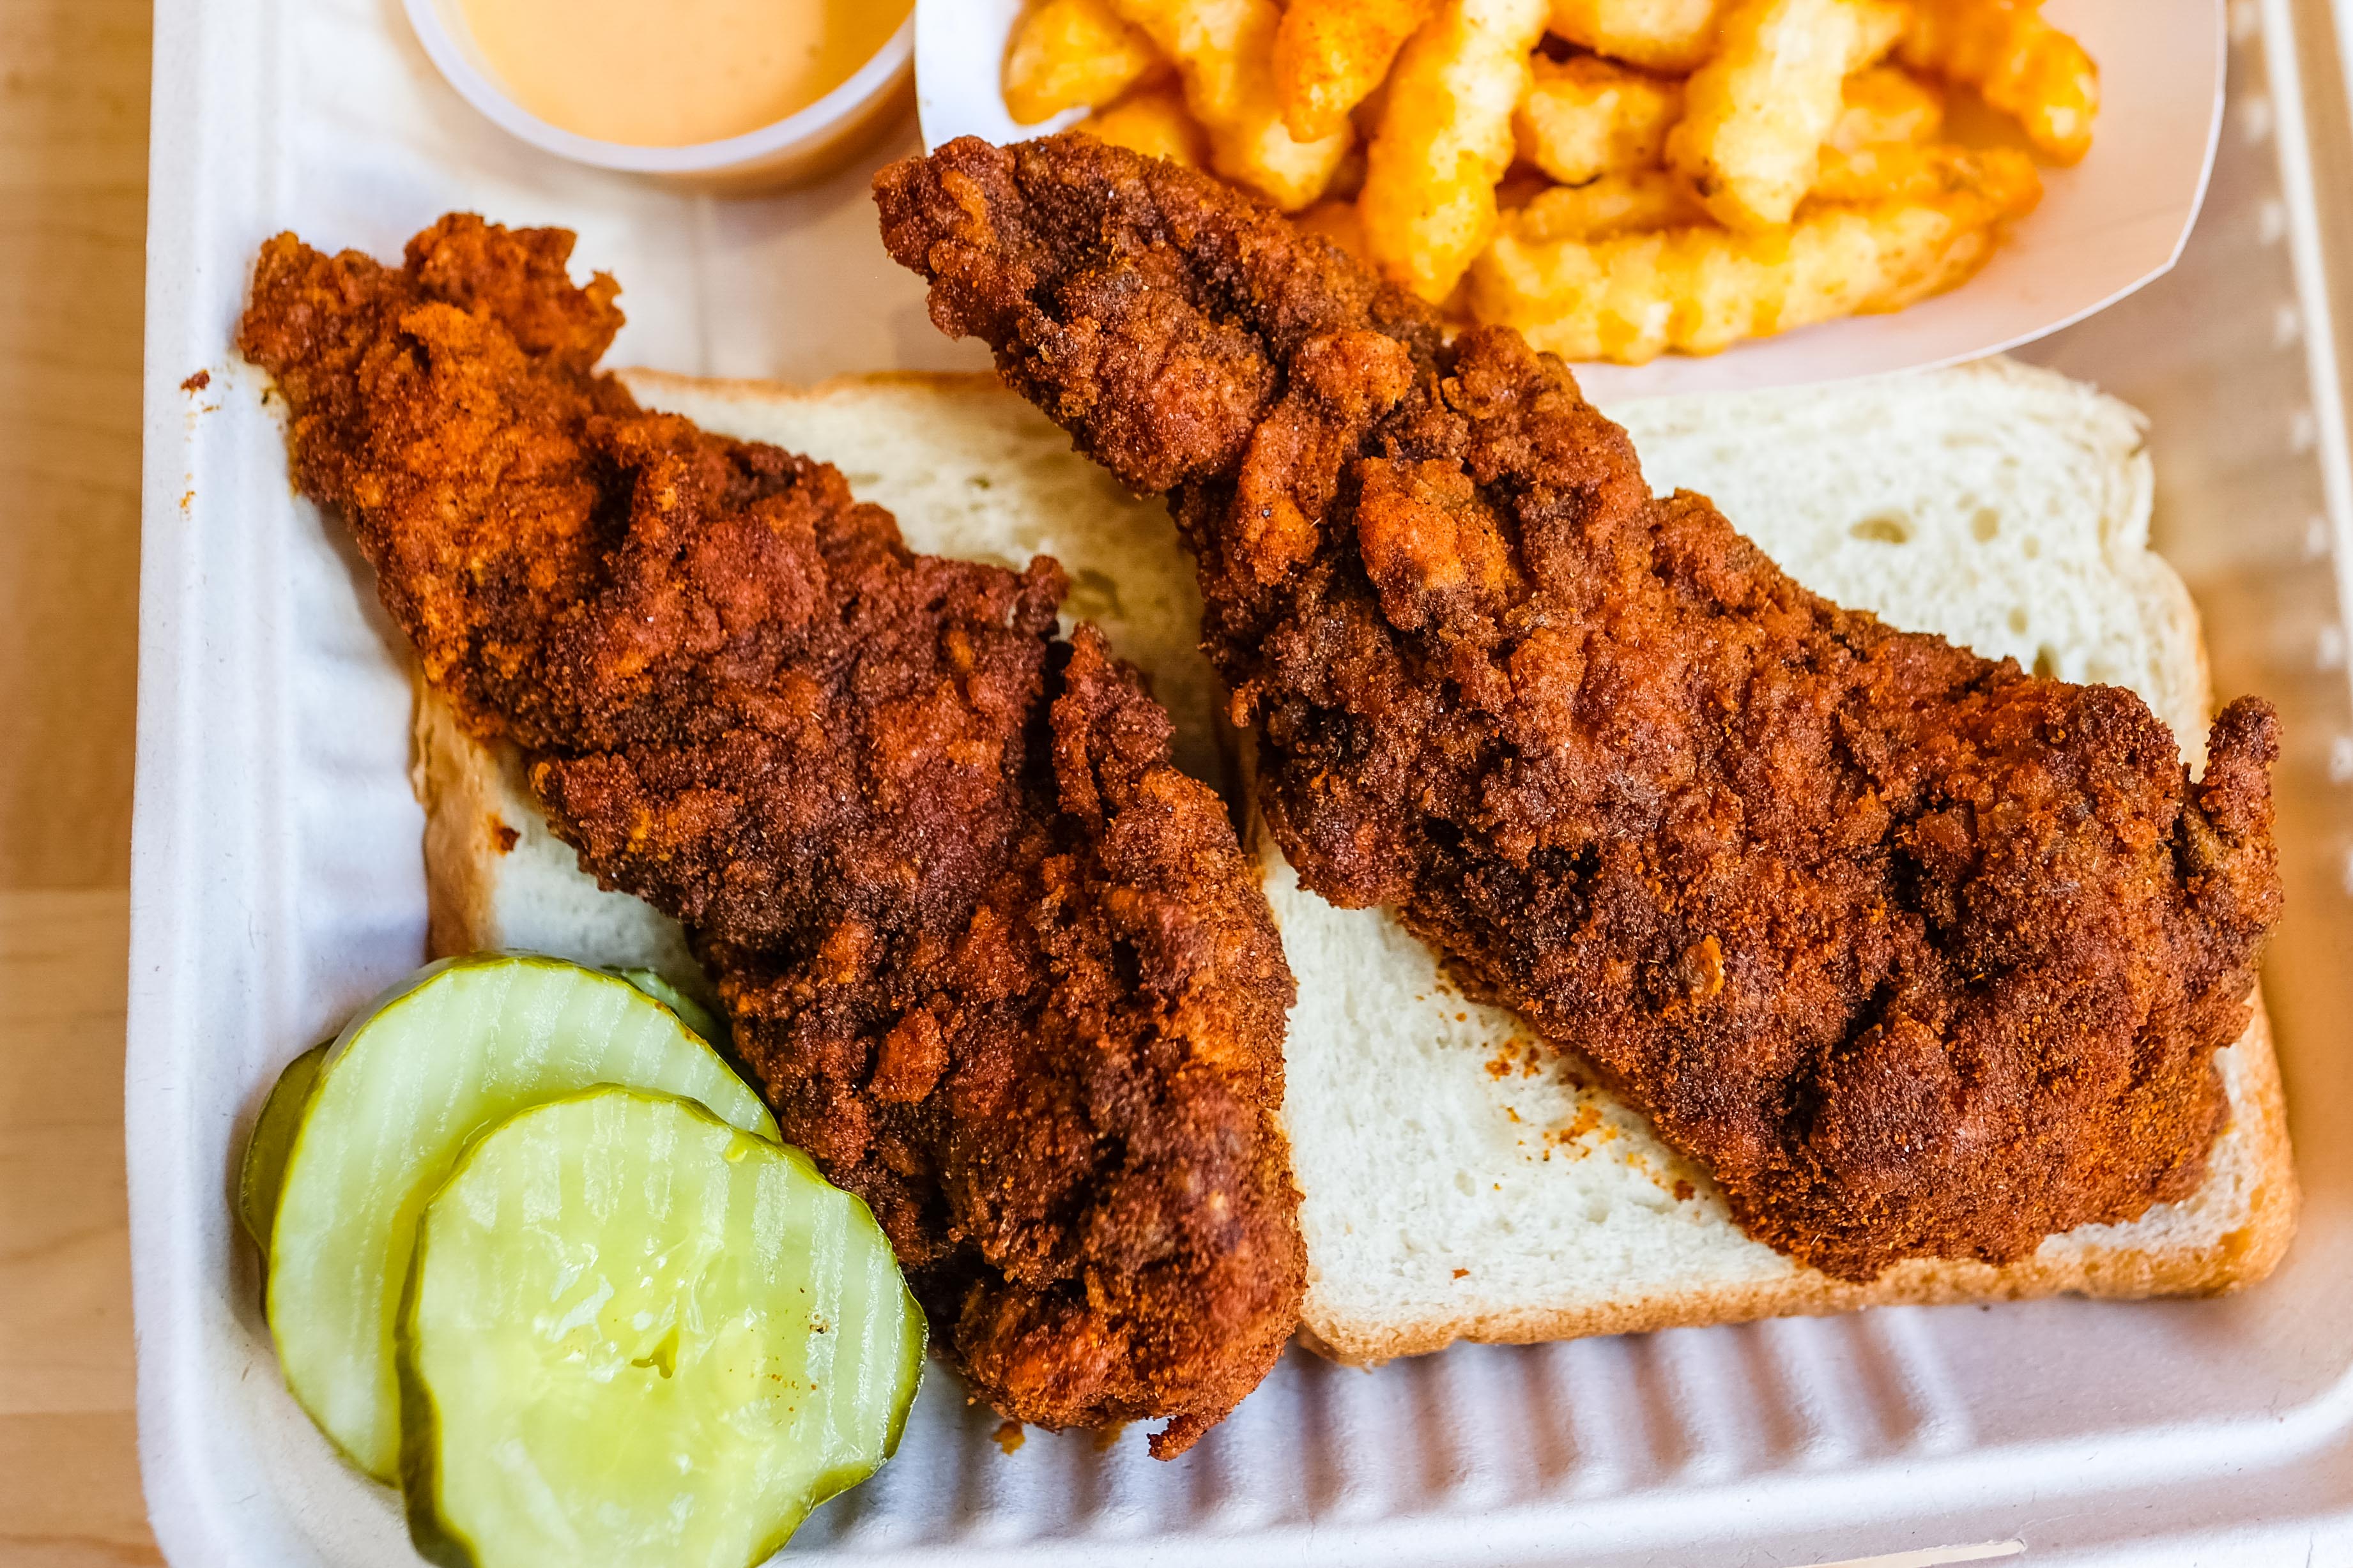 Two chicken tenders sit on a piece of white bread next to two slices of pickle and some french fries.